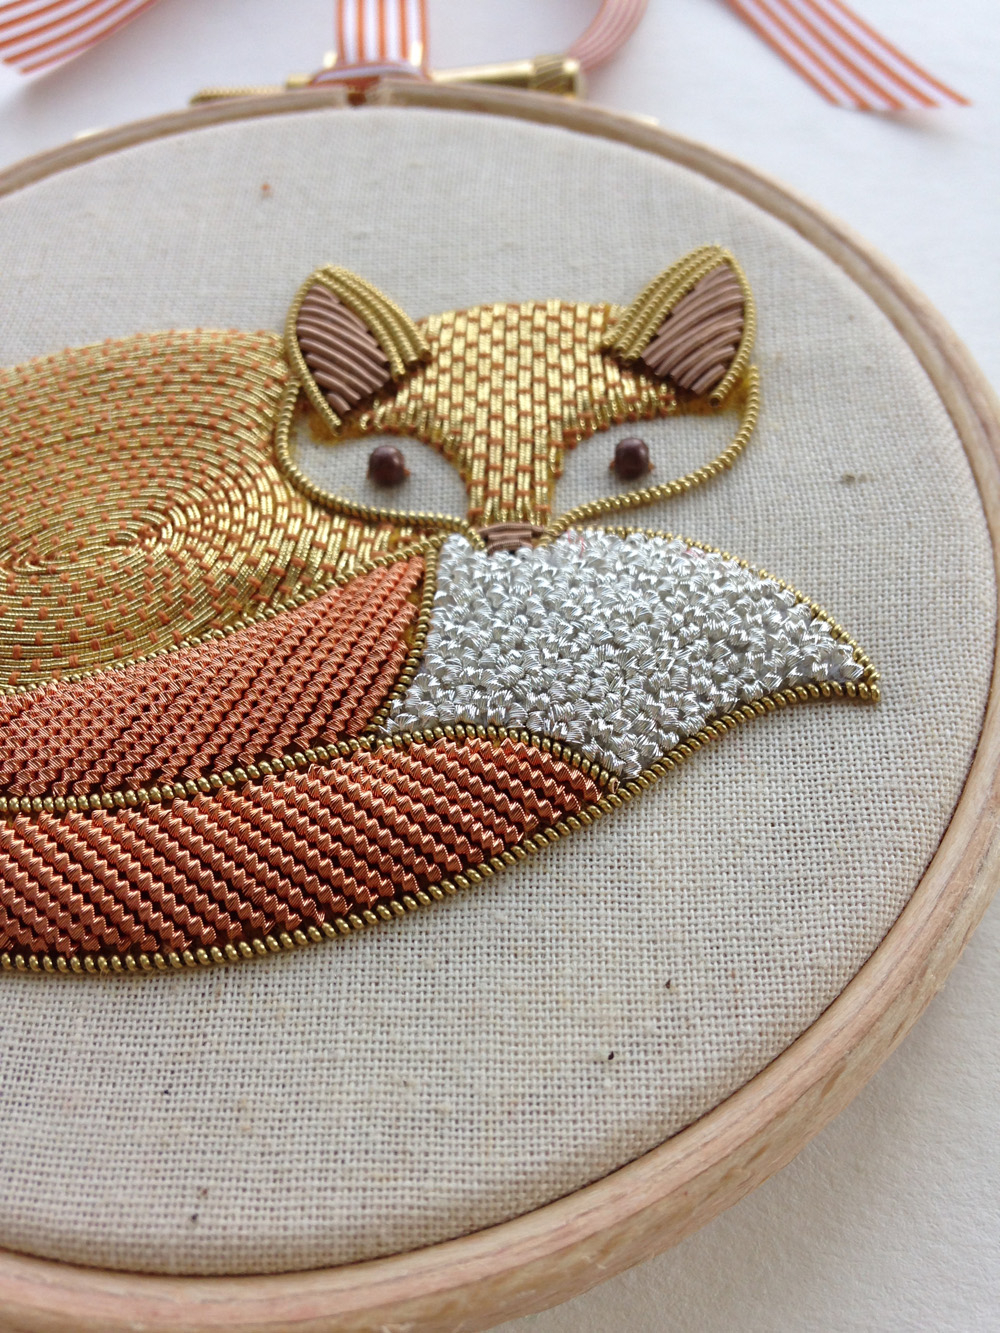 Fox Embroidery Pattern Metalwork Fox Embroidery Going Home To Roost